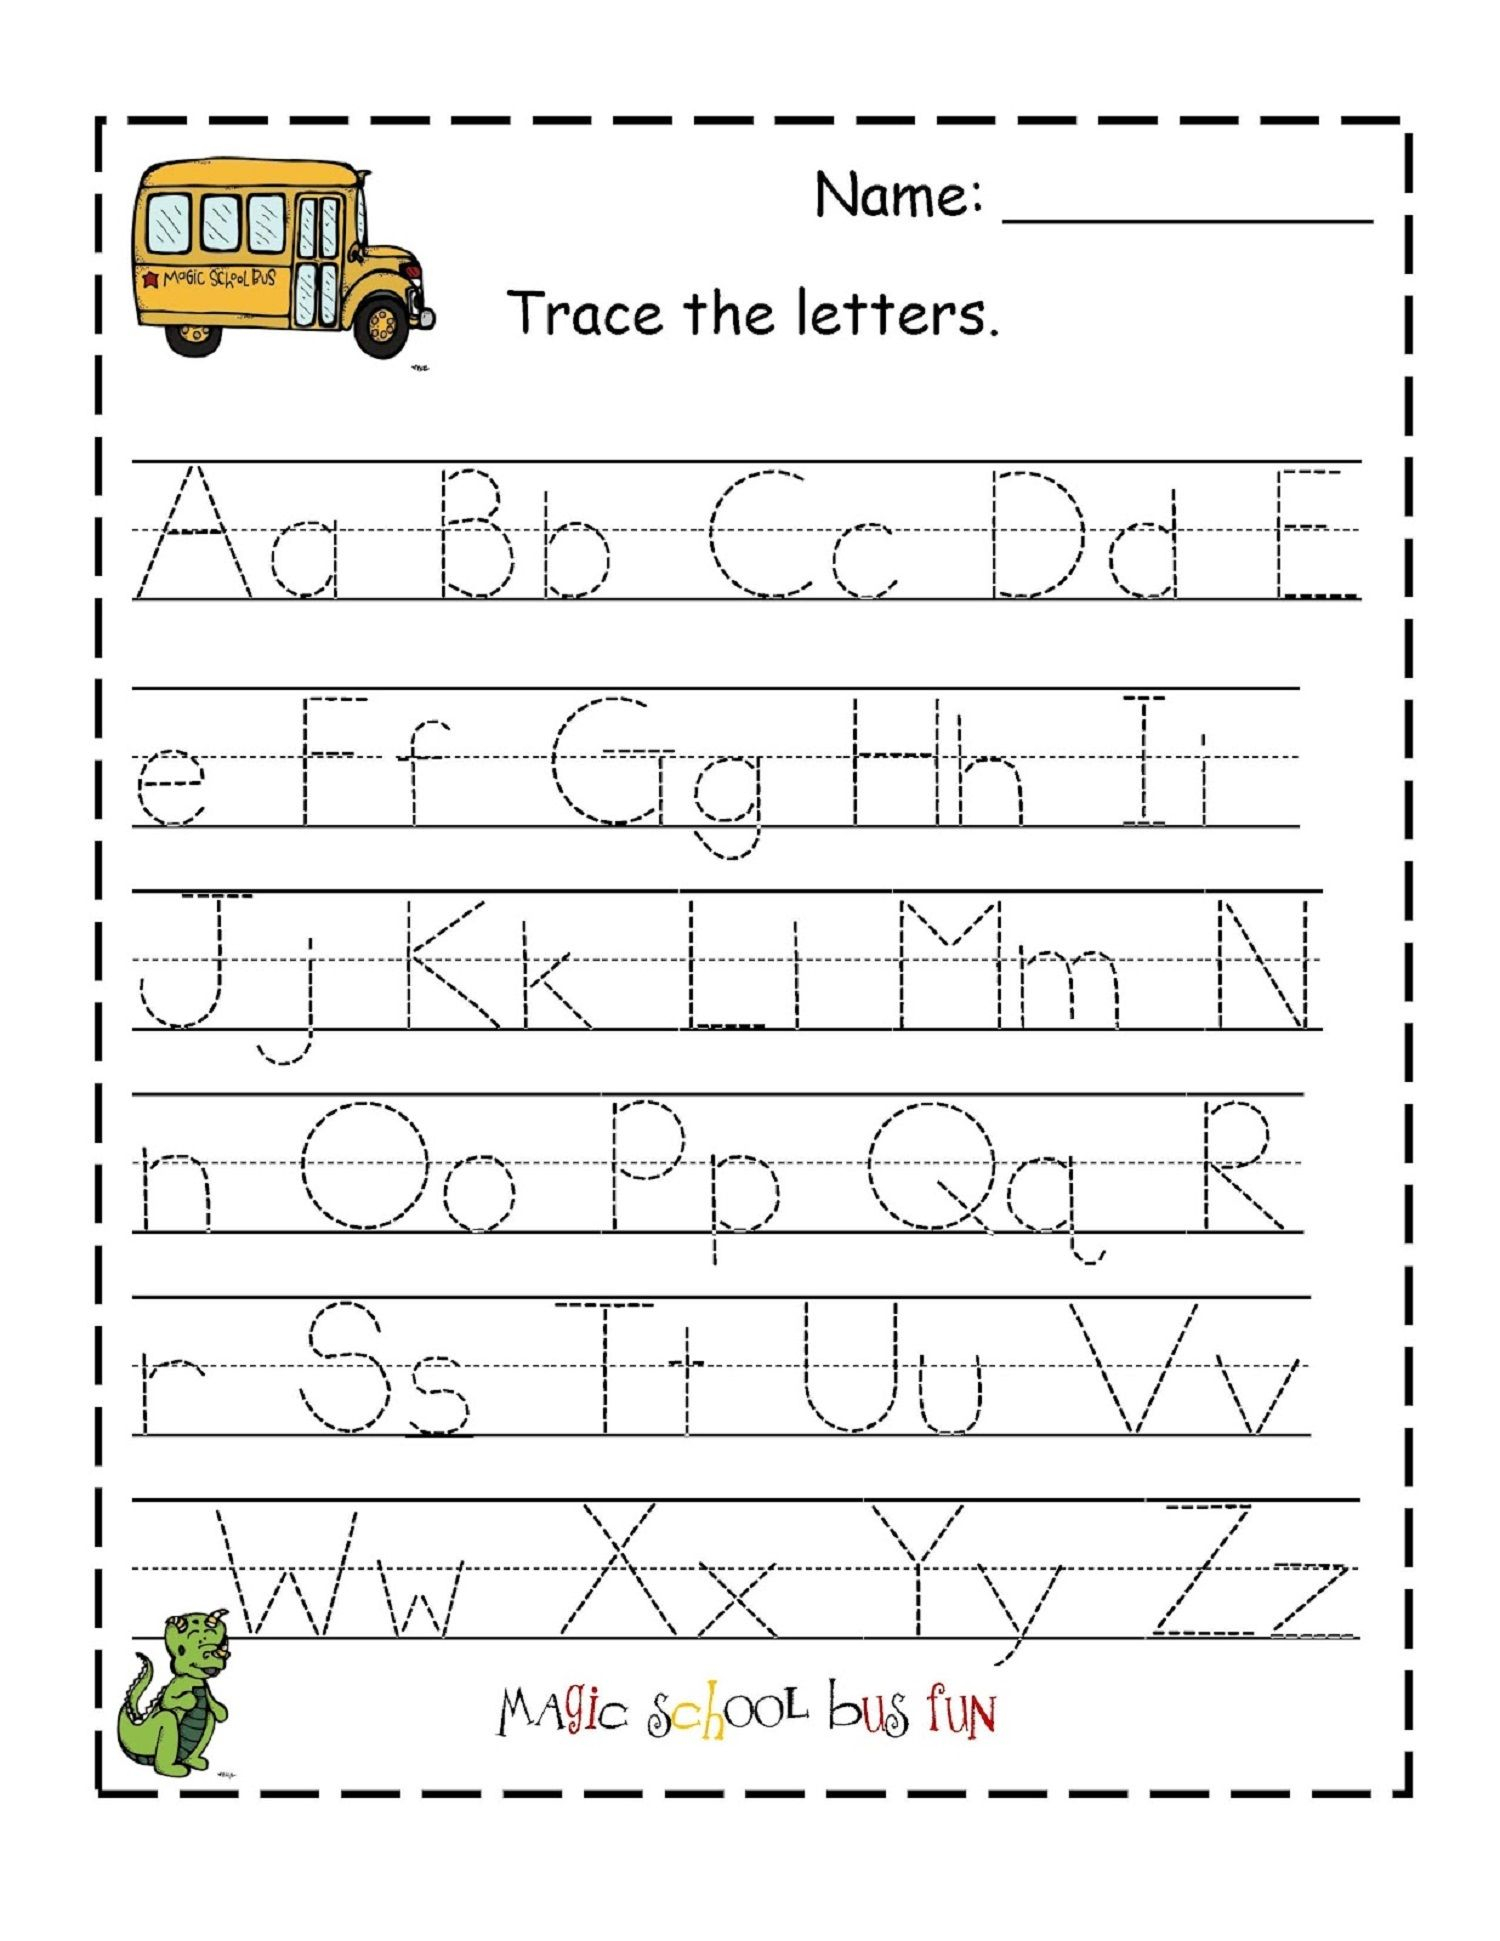 Traceable Alphabet For Learning Exercise | Letter Tracing inside Downloadable Tracing Letters